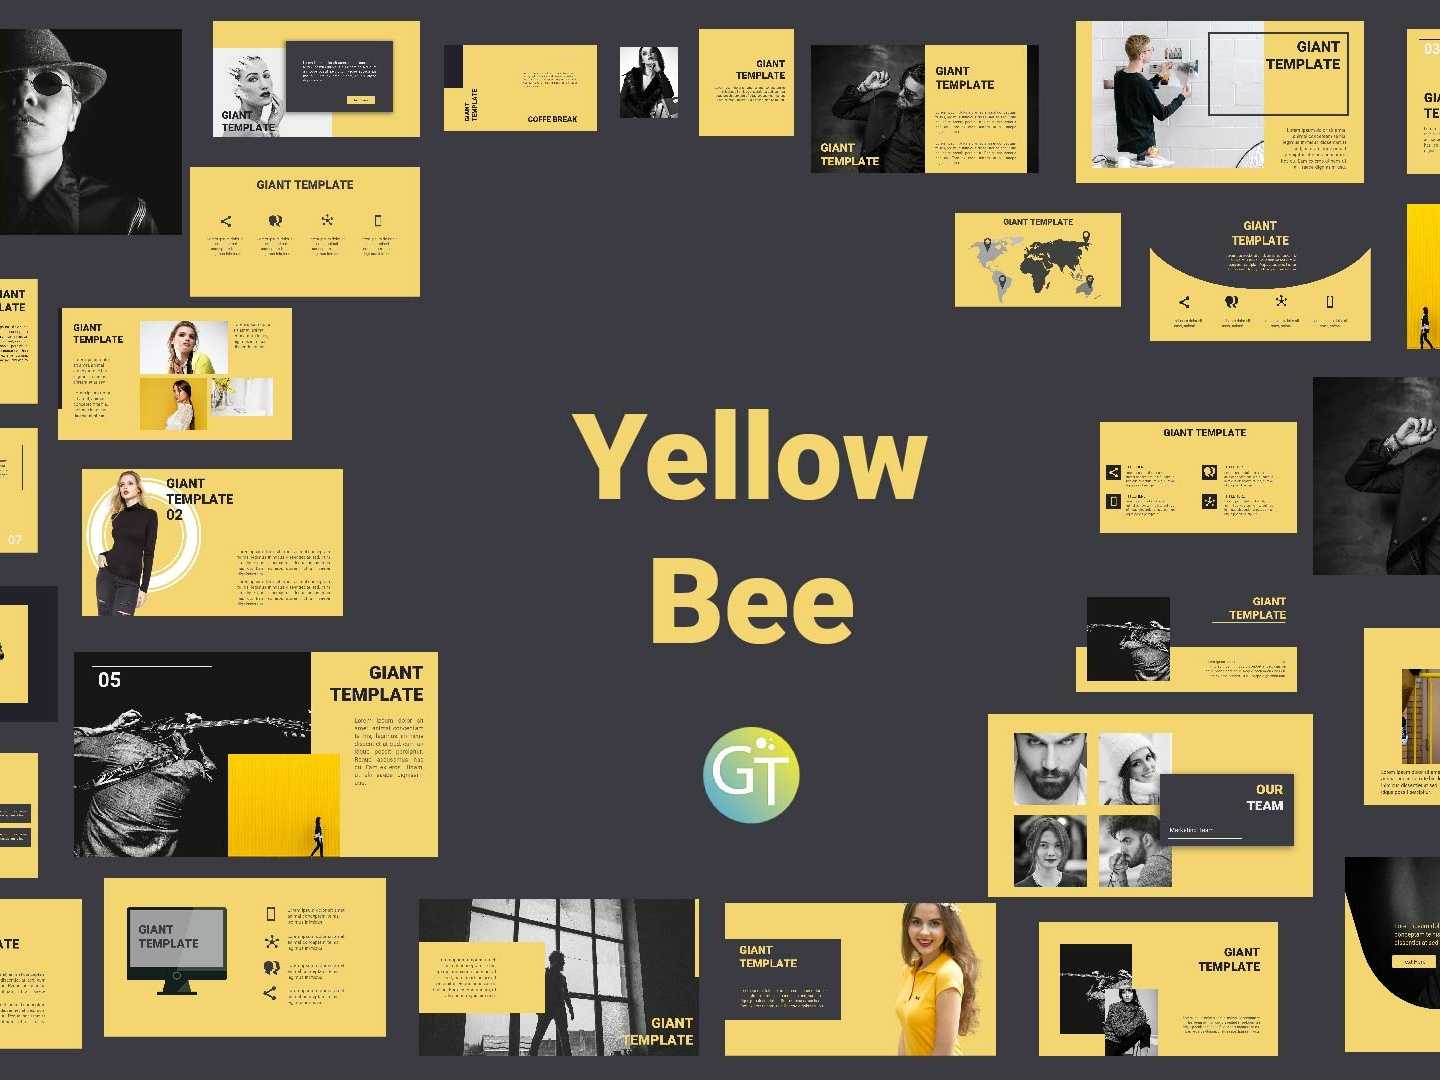 Yellowbee Free Powerpoint Template Free Downloadgiant For Powerpoint Animation Templates Free Download